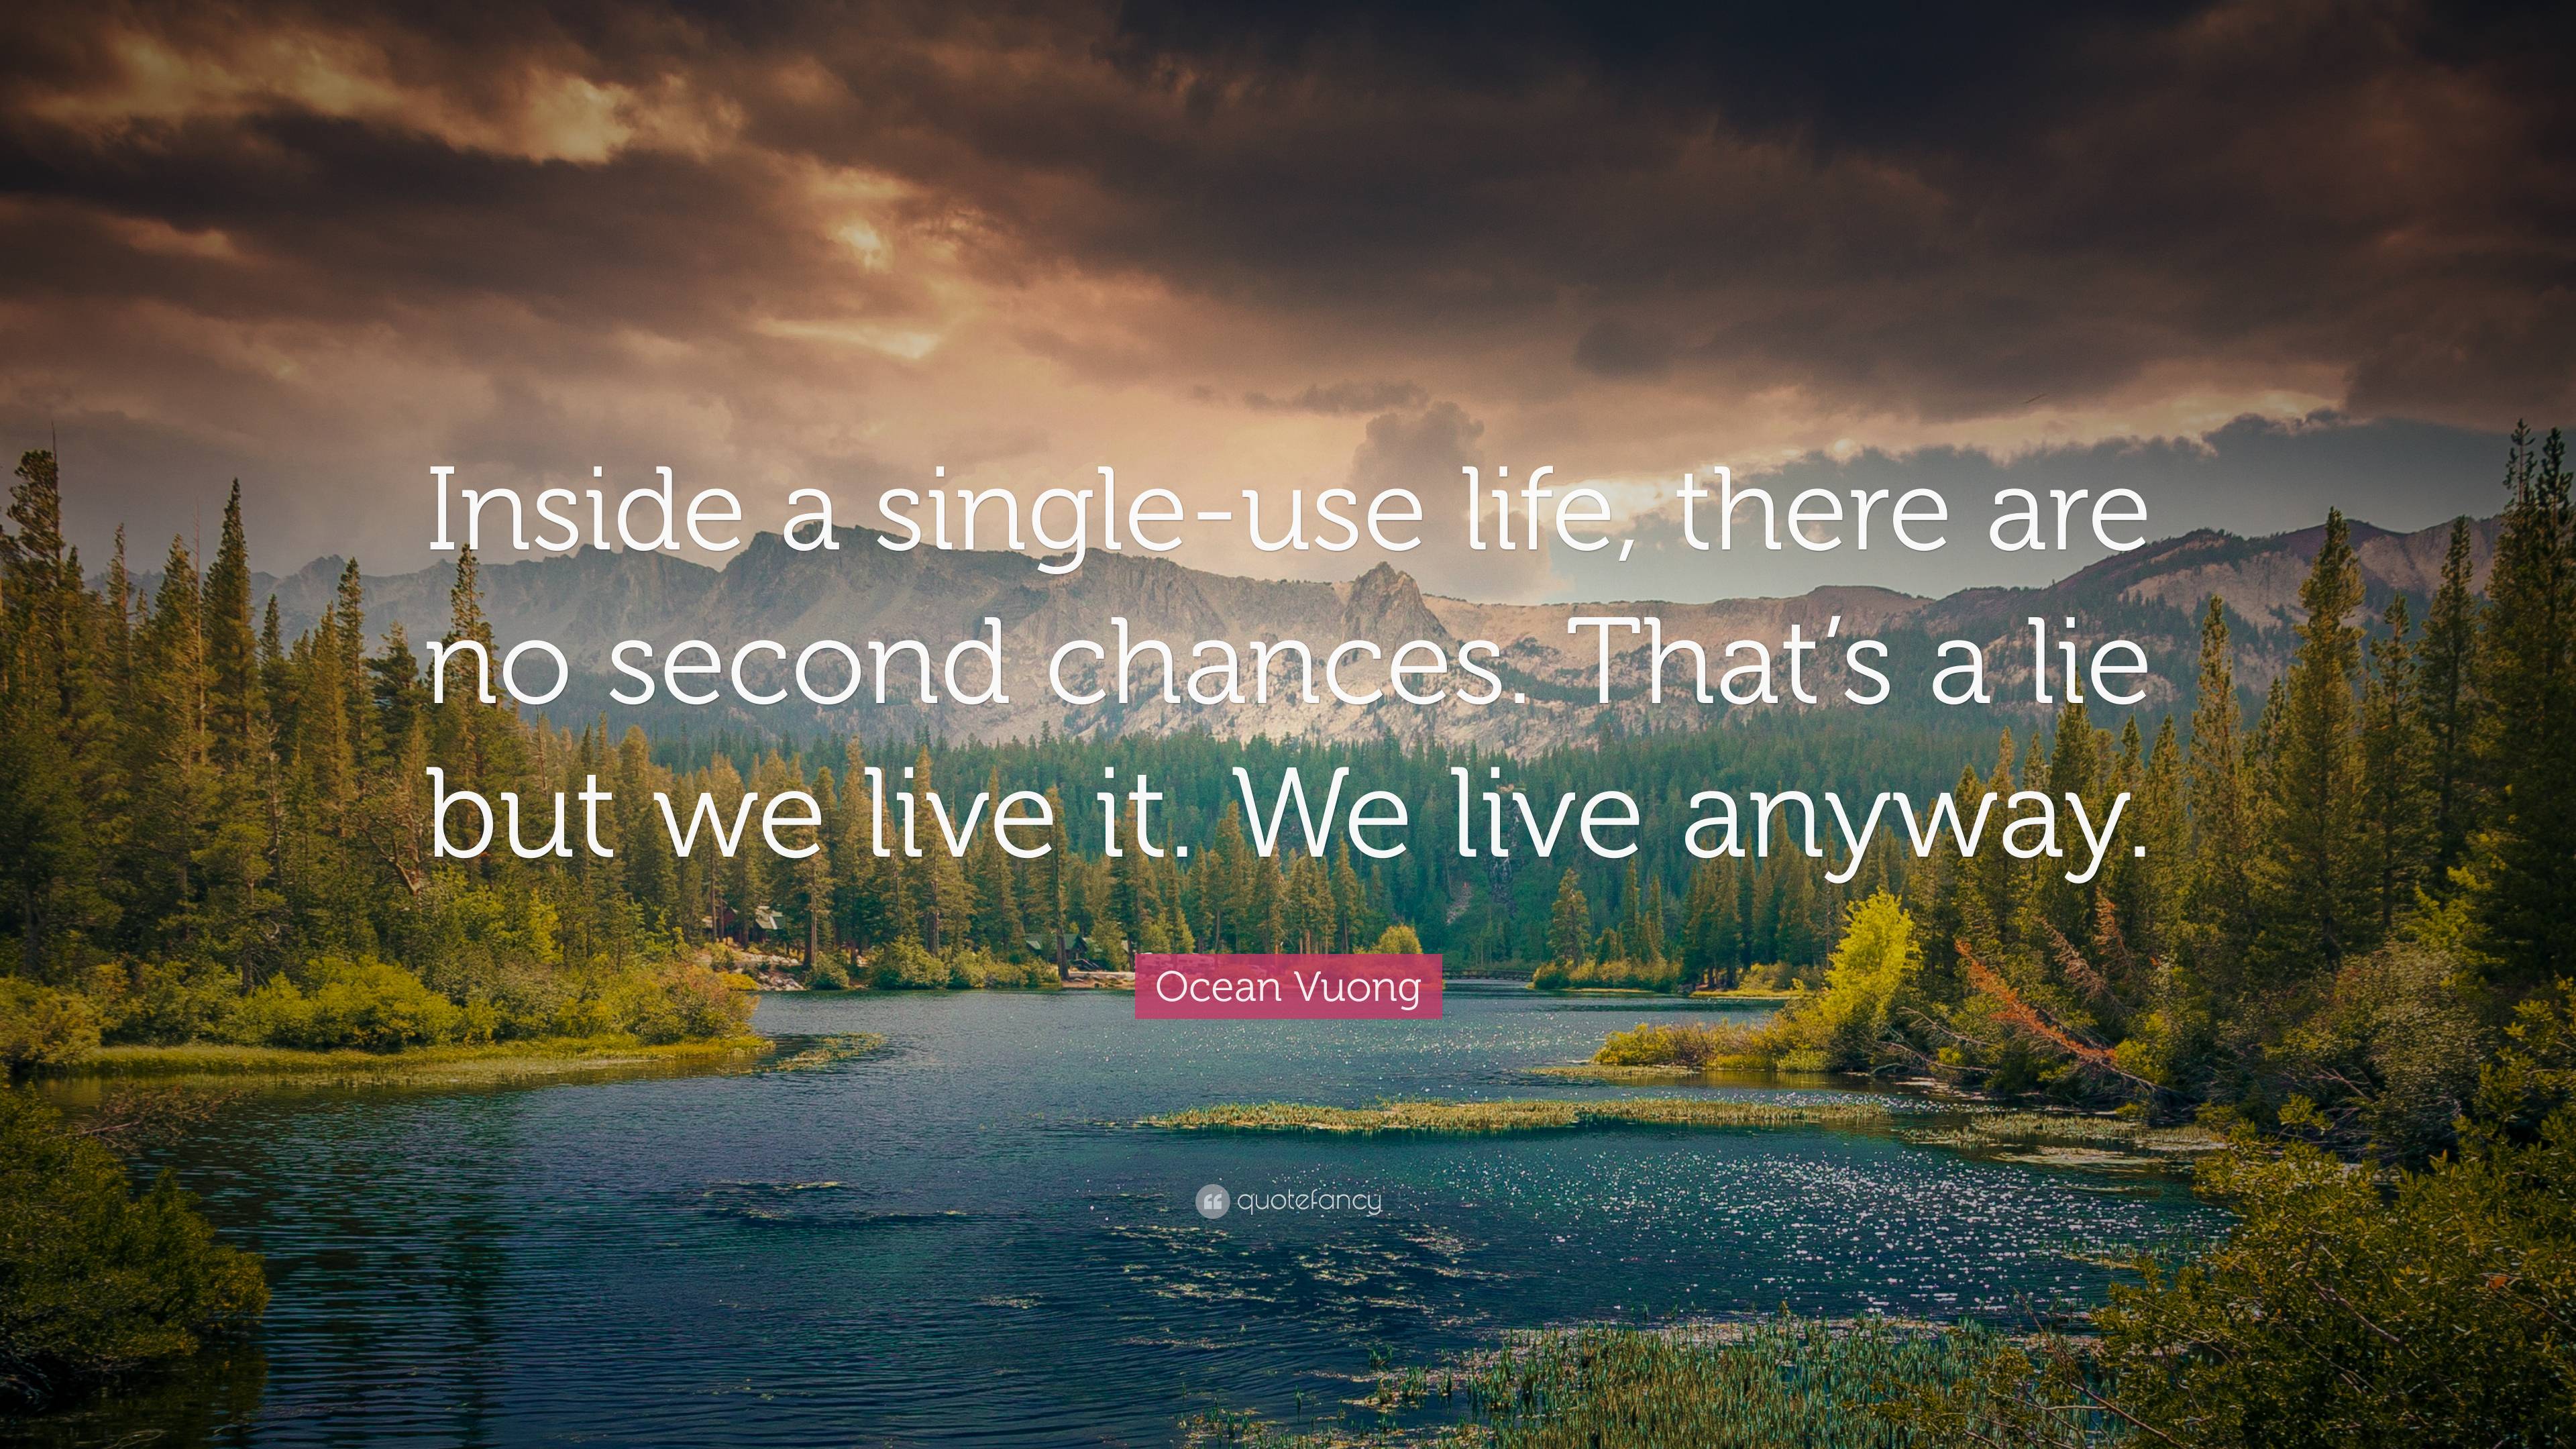 Ocean Vuong Quote: “Inside a single-use life, there are no second ...